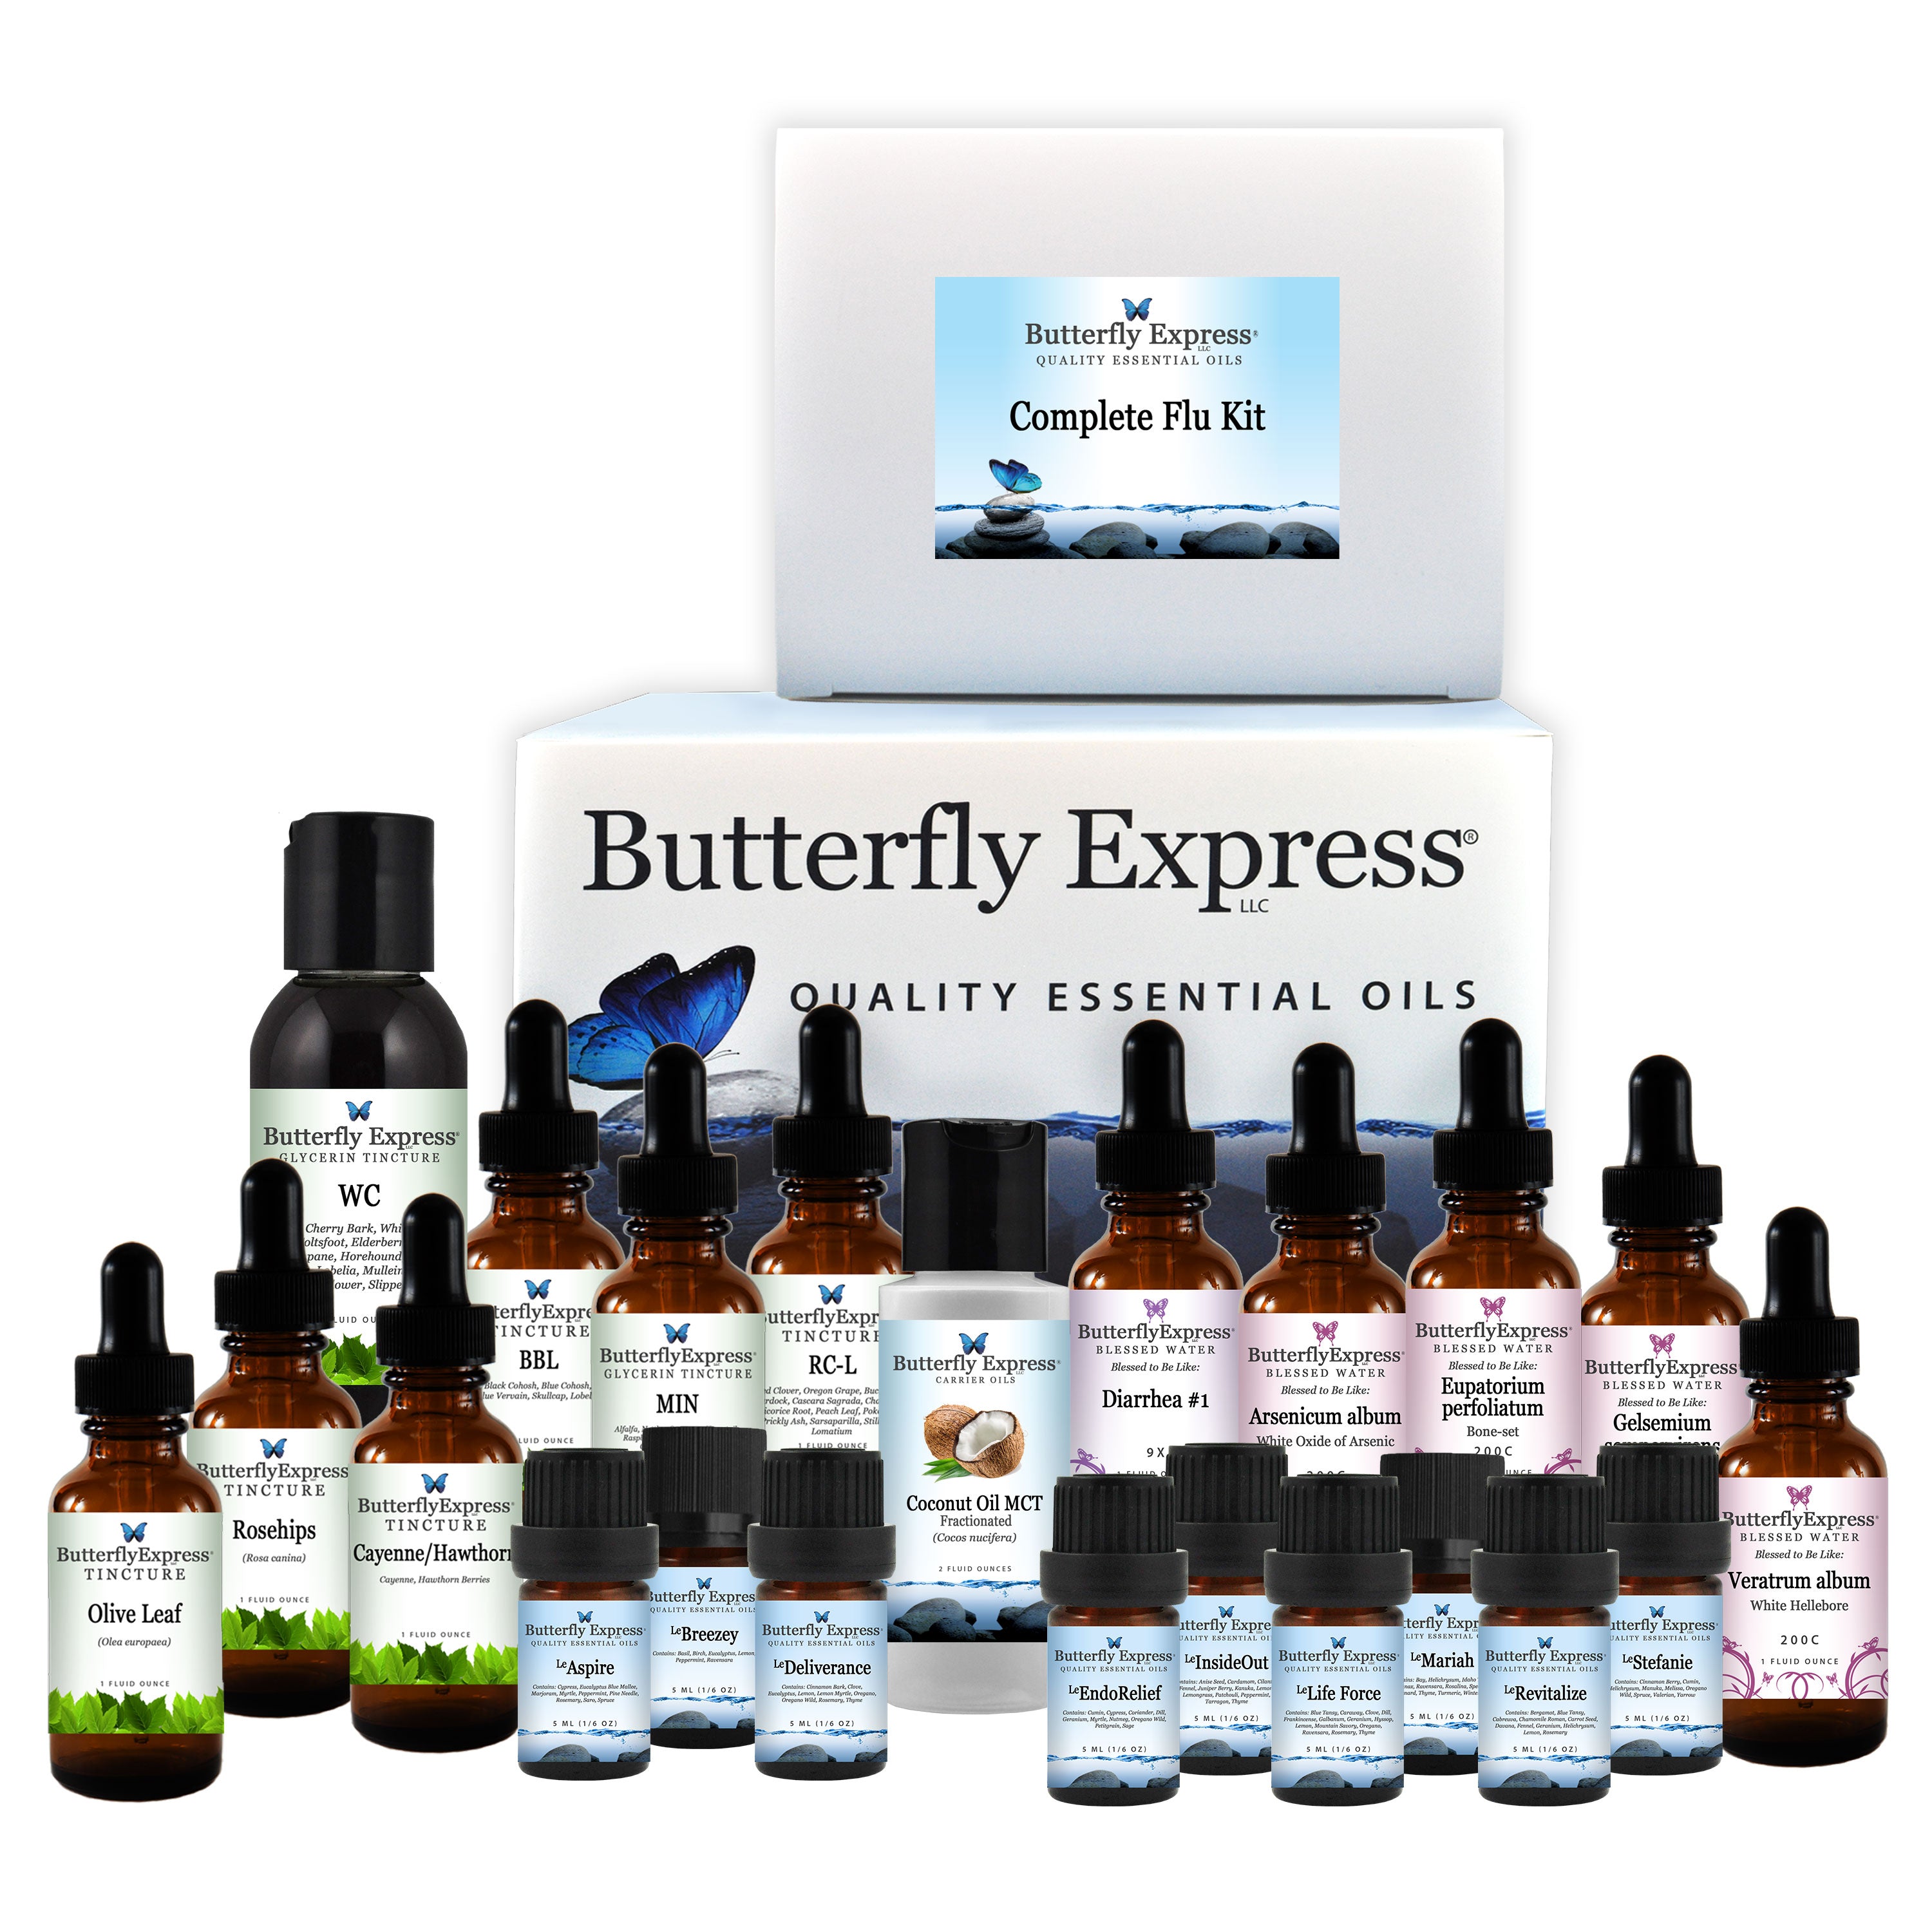 Complete Flu Kit – Butterfly Express Quality Essential Oils